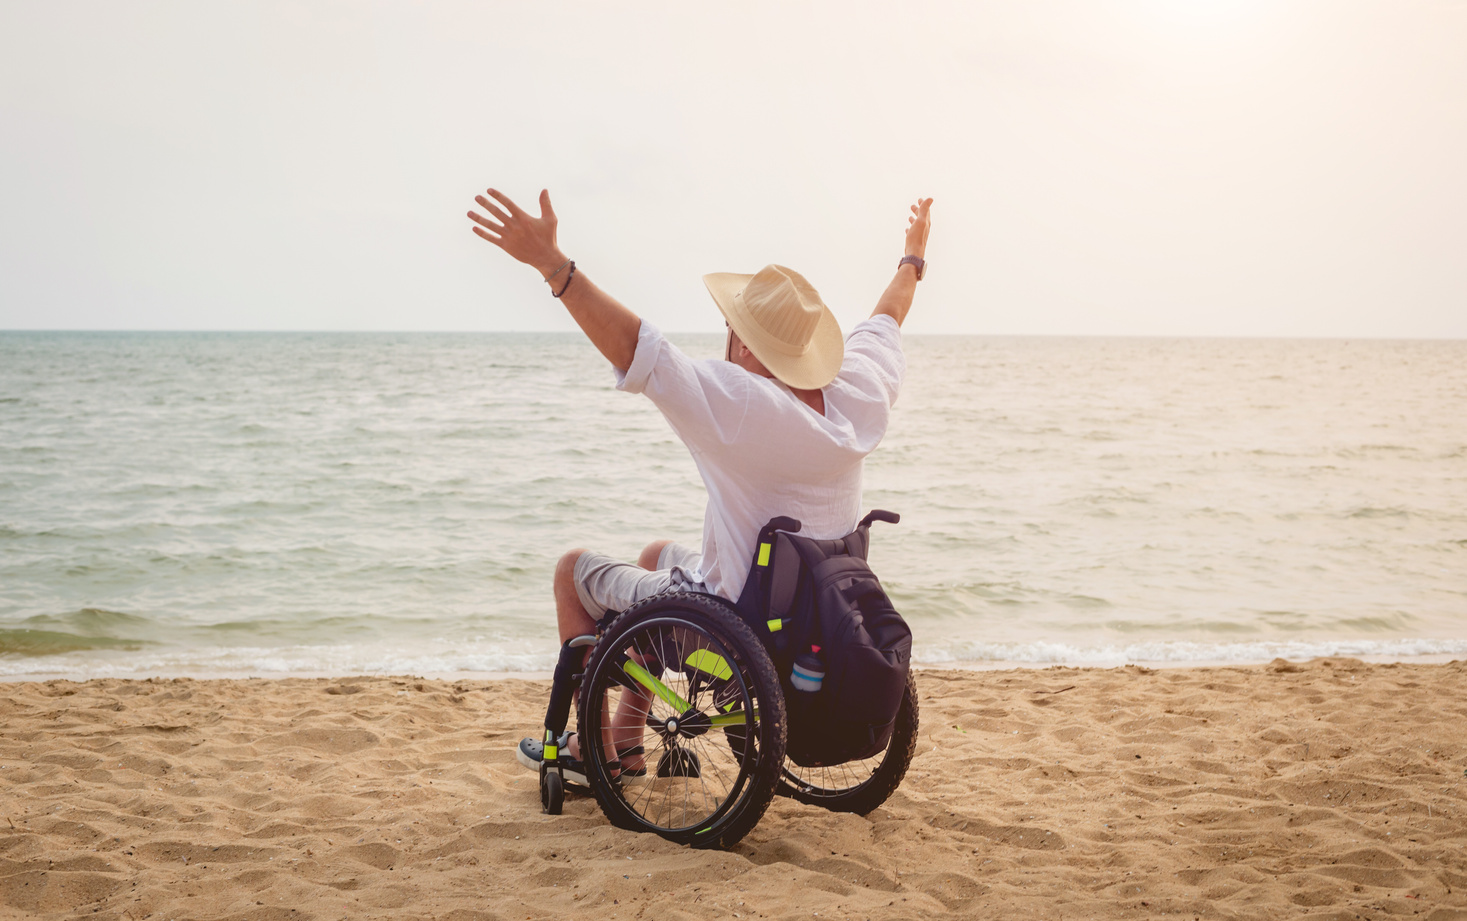 Disabled man in a wheelchair on the beach.